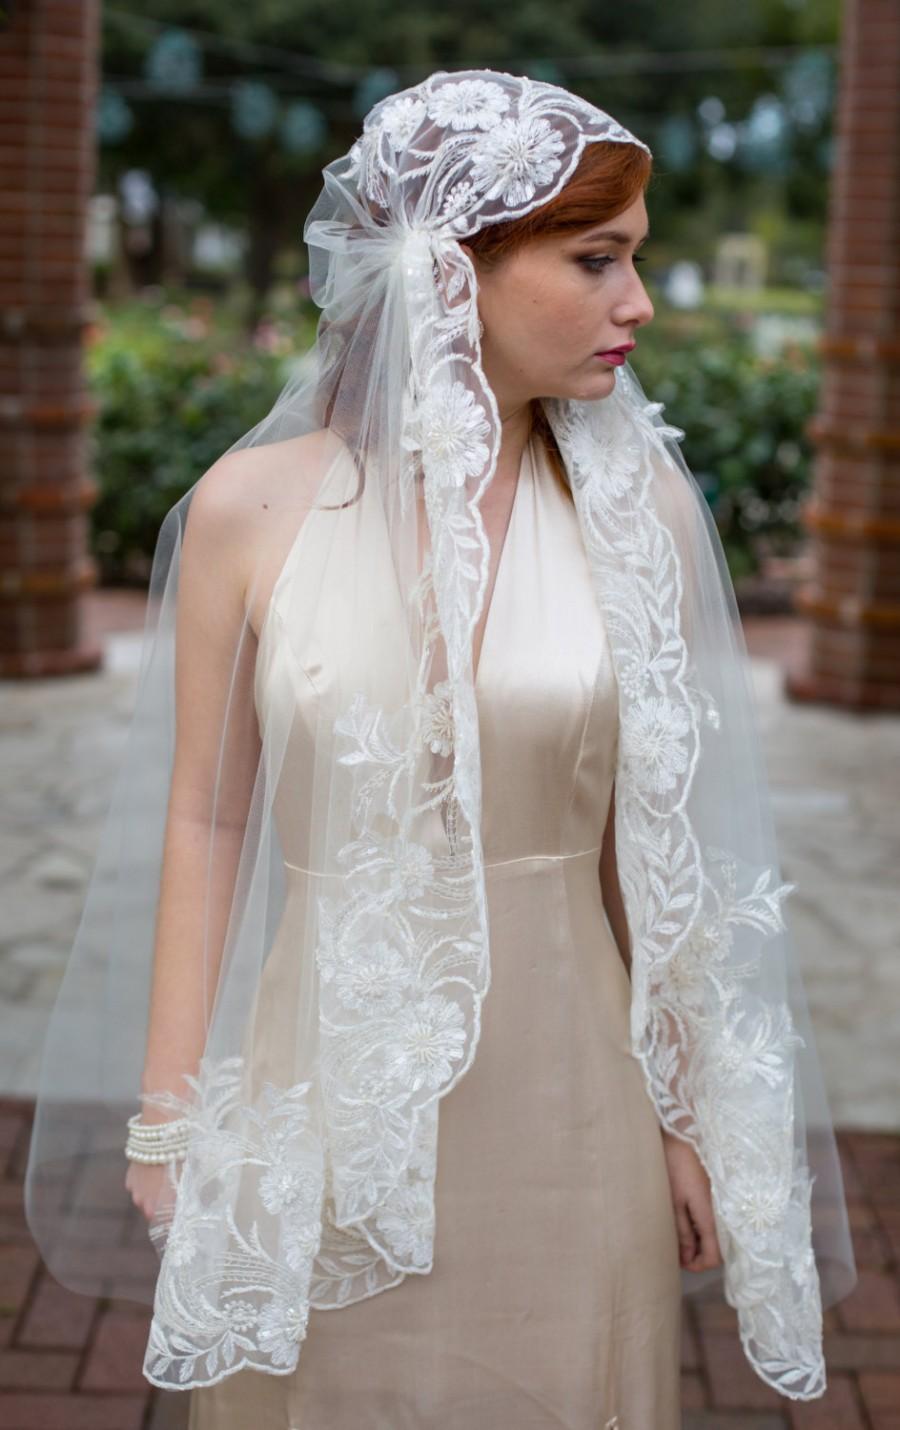 Wedding - Juliet cap bohemian bride veil with feather like ivory beaded lace surrounding "Kate"